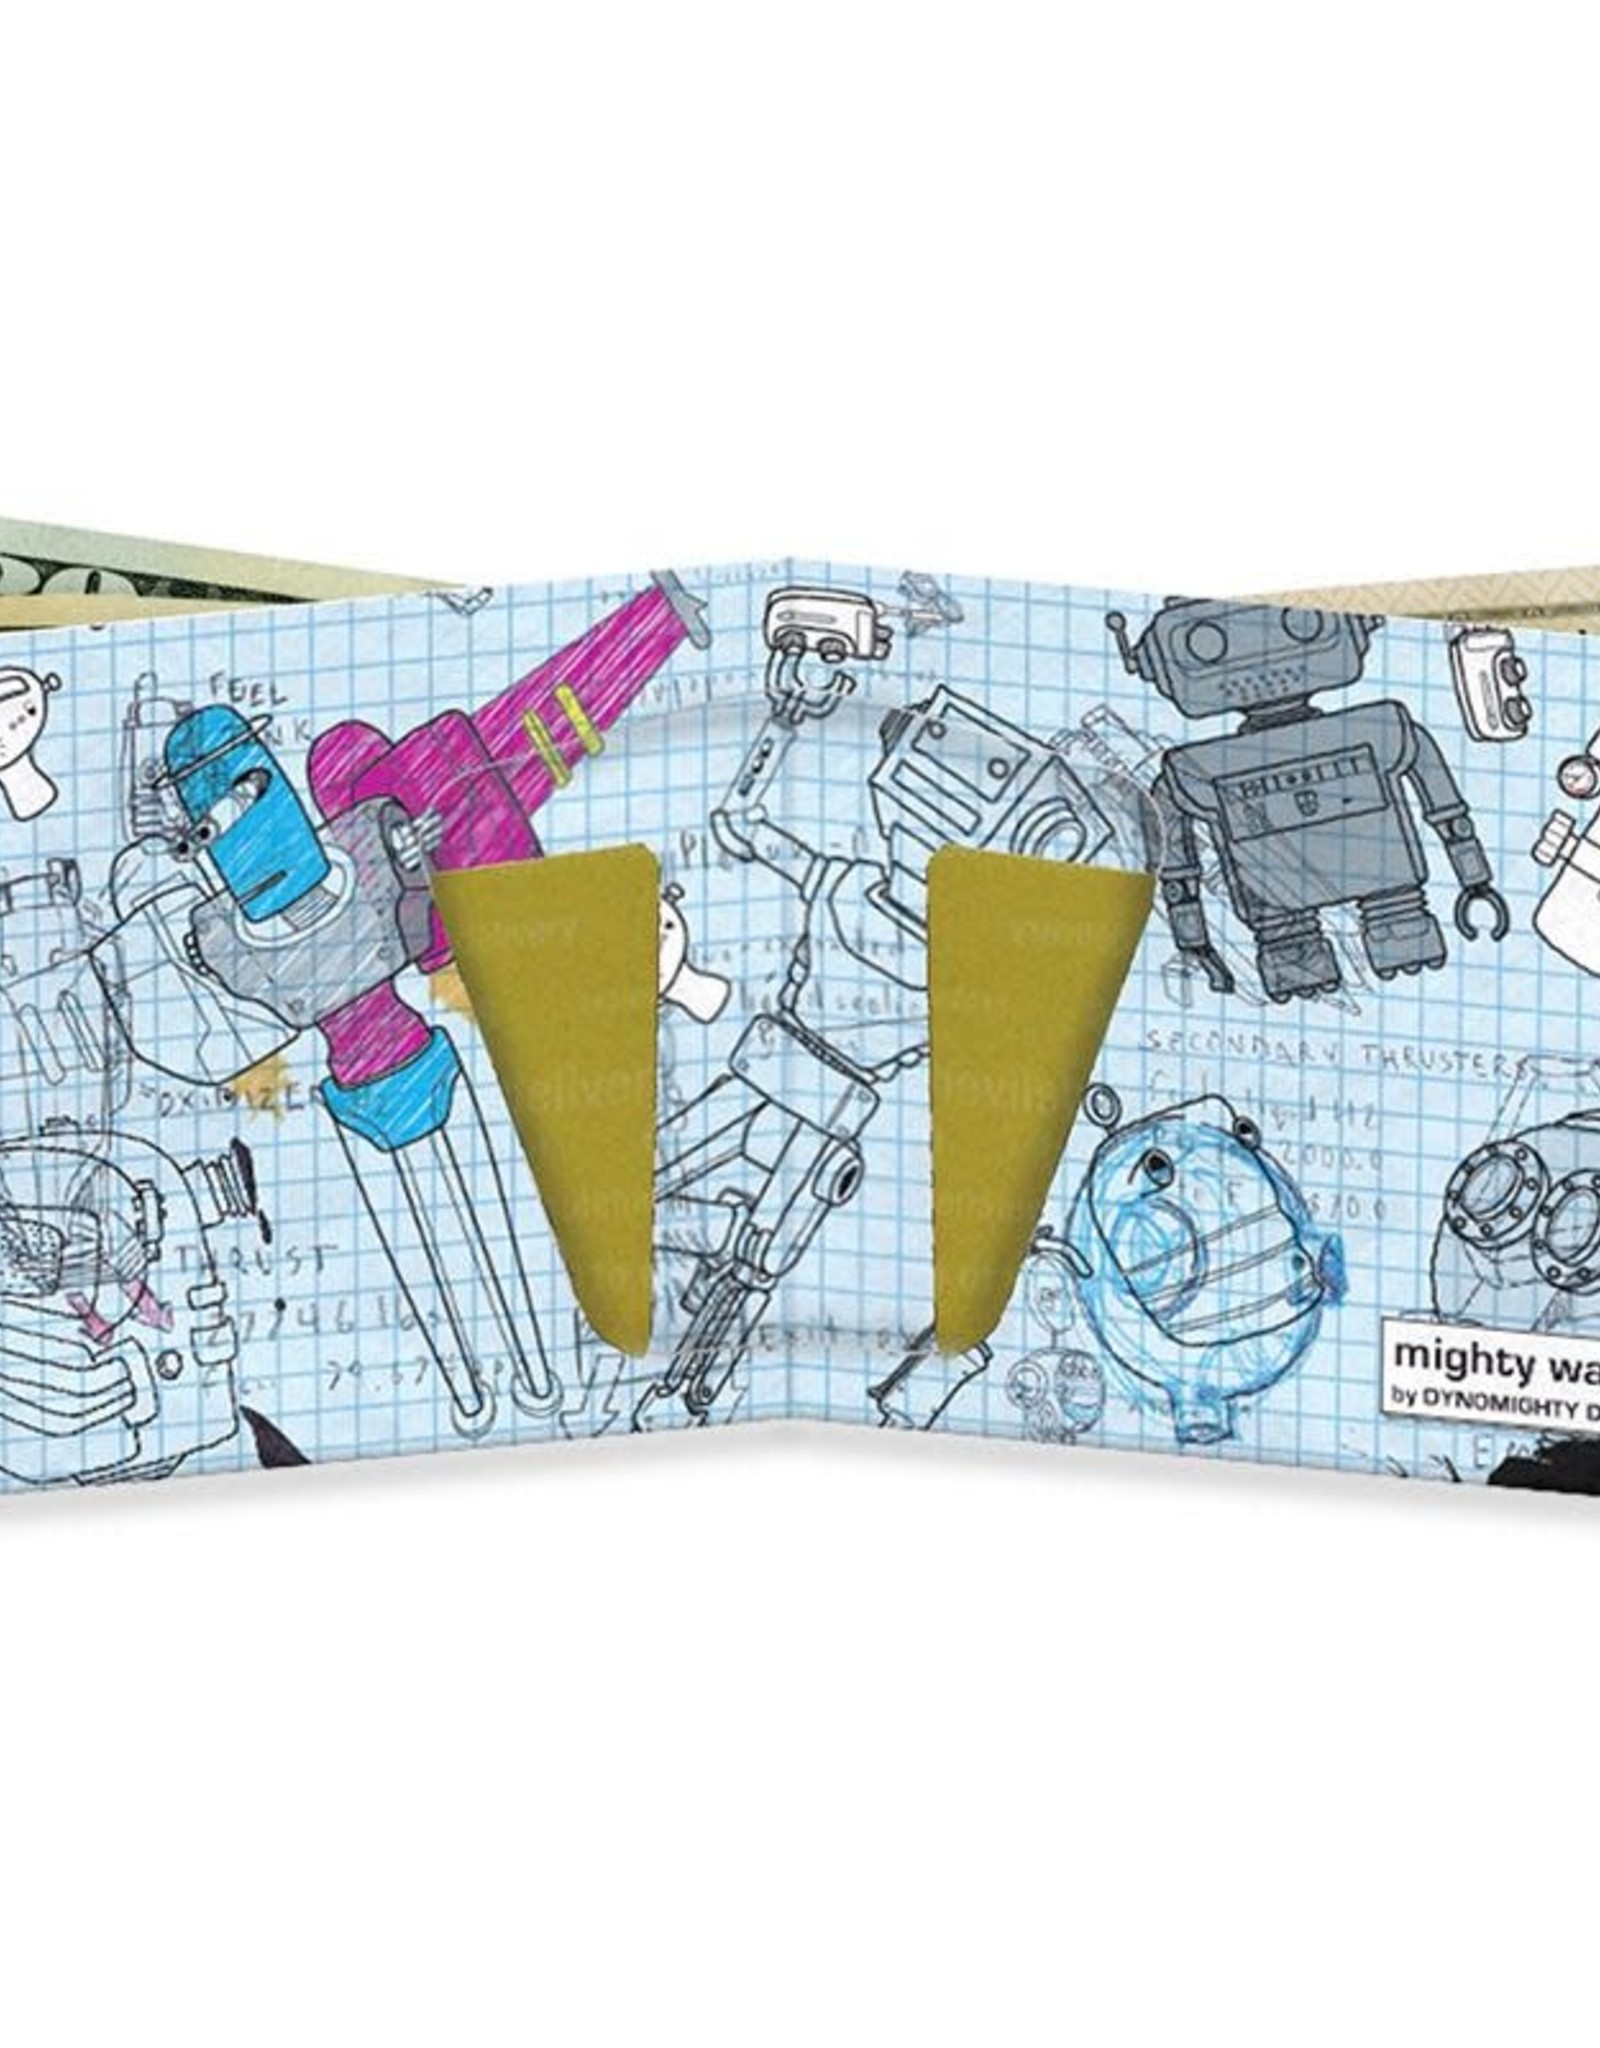 Dynomighty Design “All of the Robots” Dynomighty Tyvek Wallet